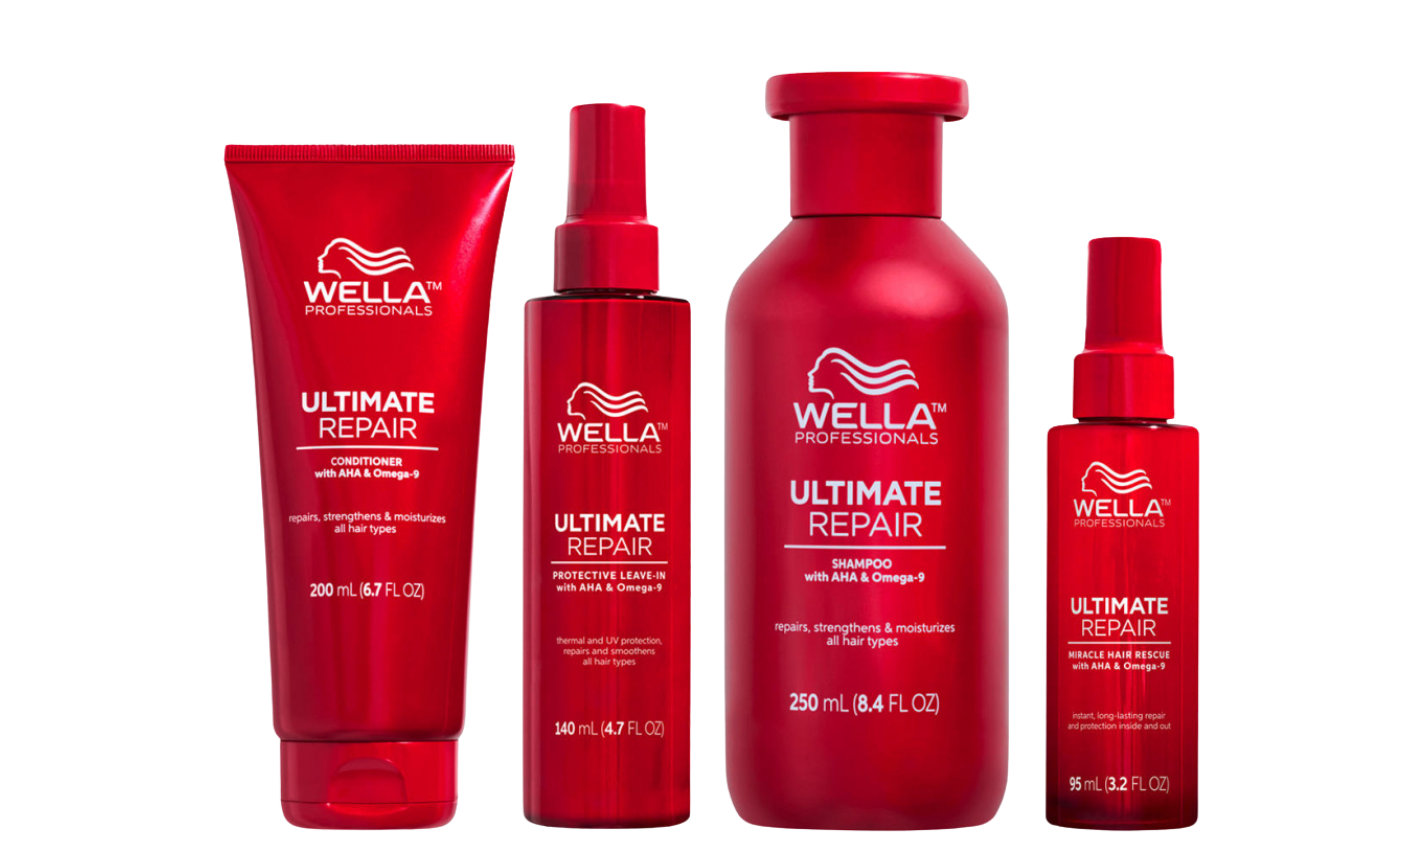 wella ultimate repair picture of products